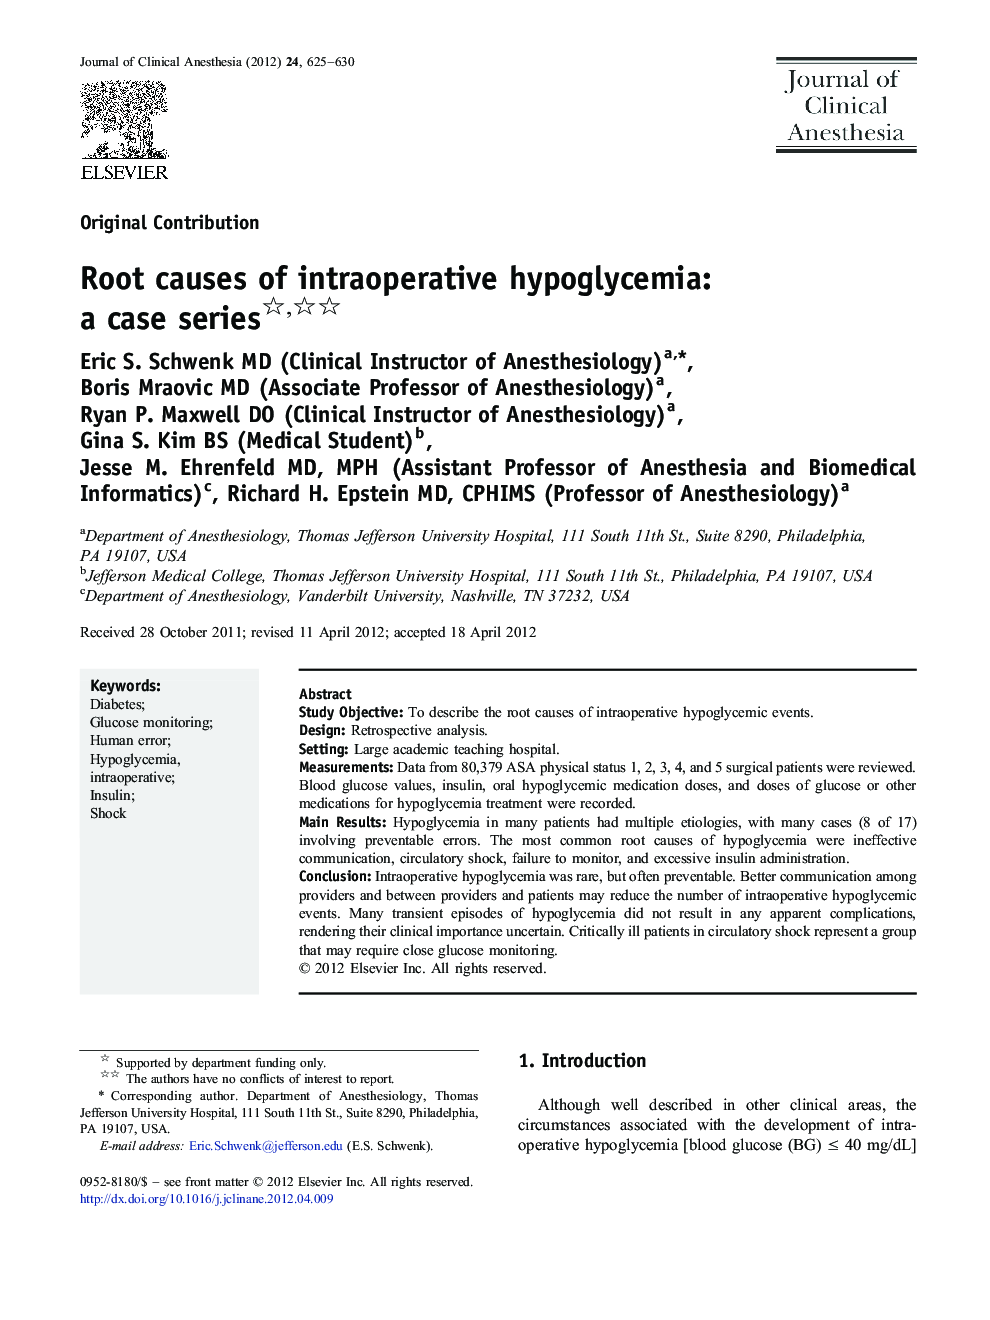 Root causes of intraoperative hypoglycemia: a case series 